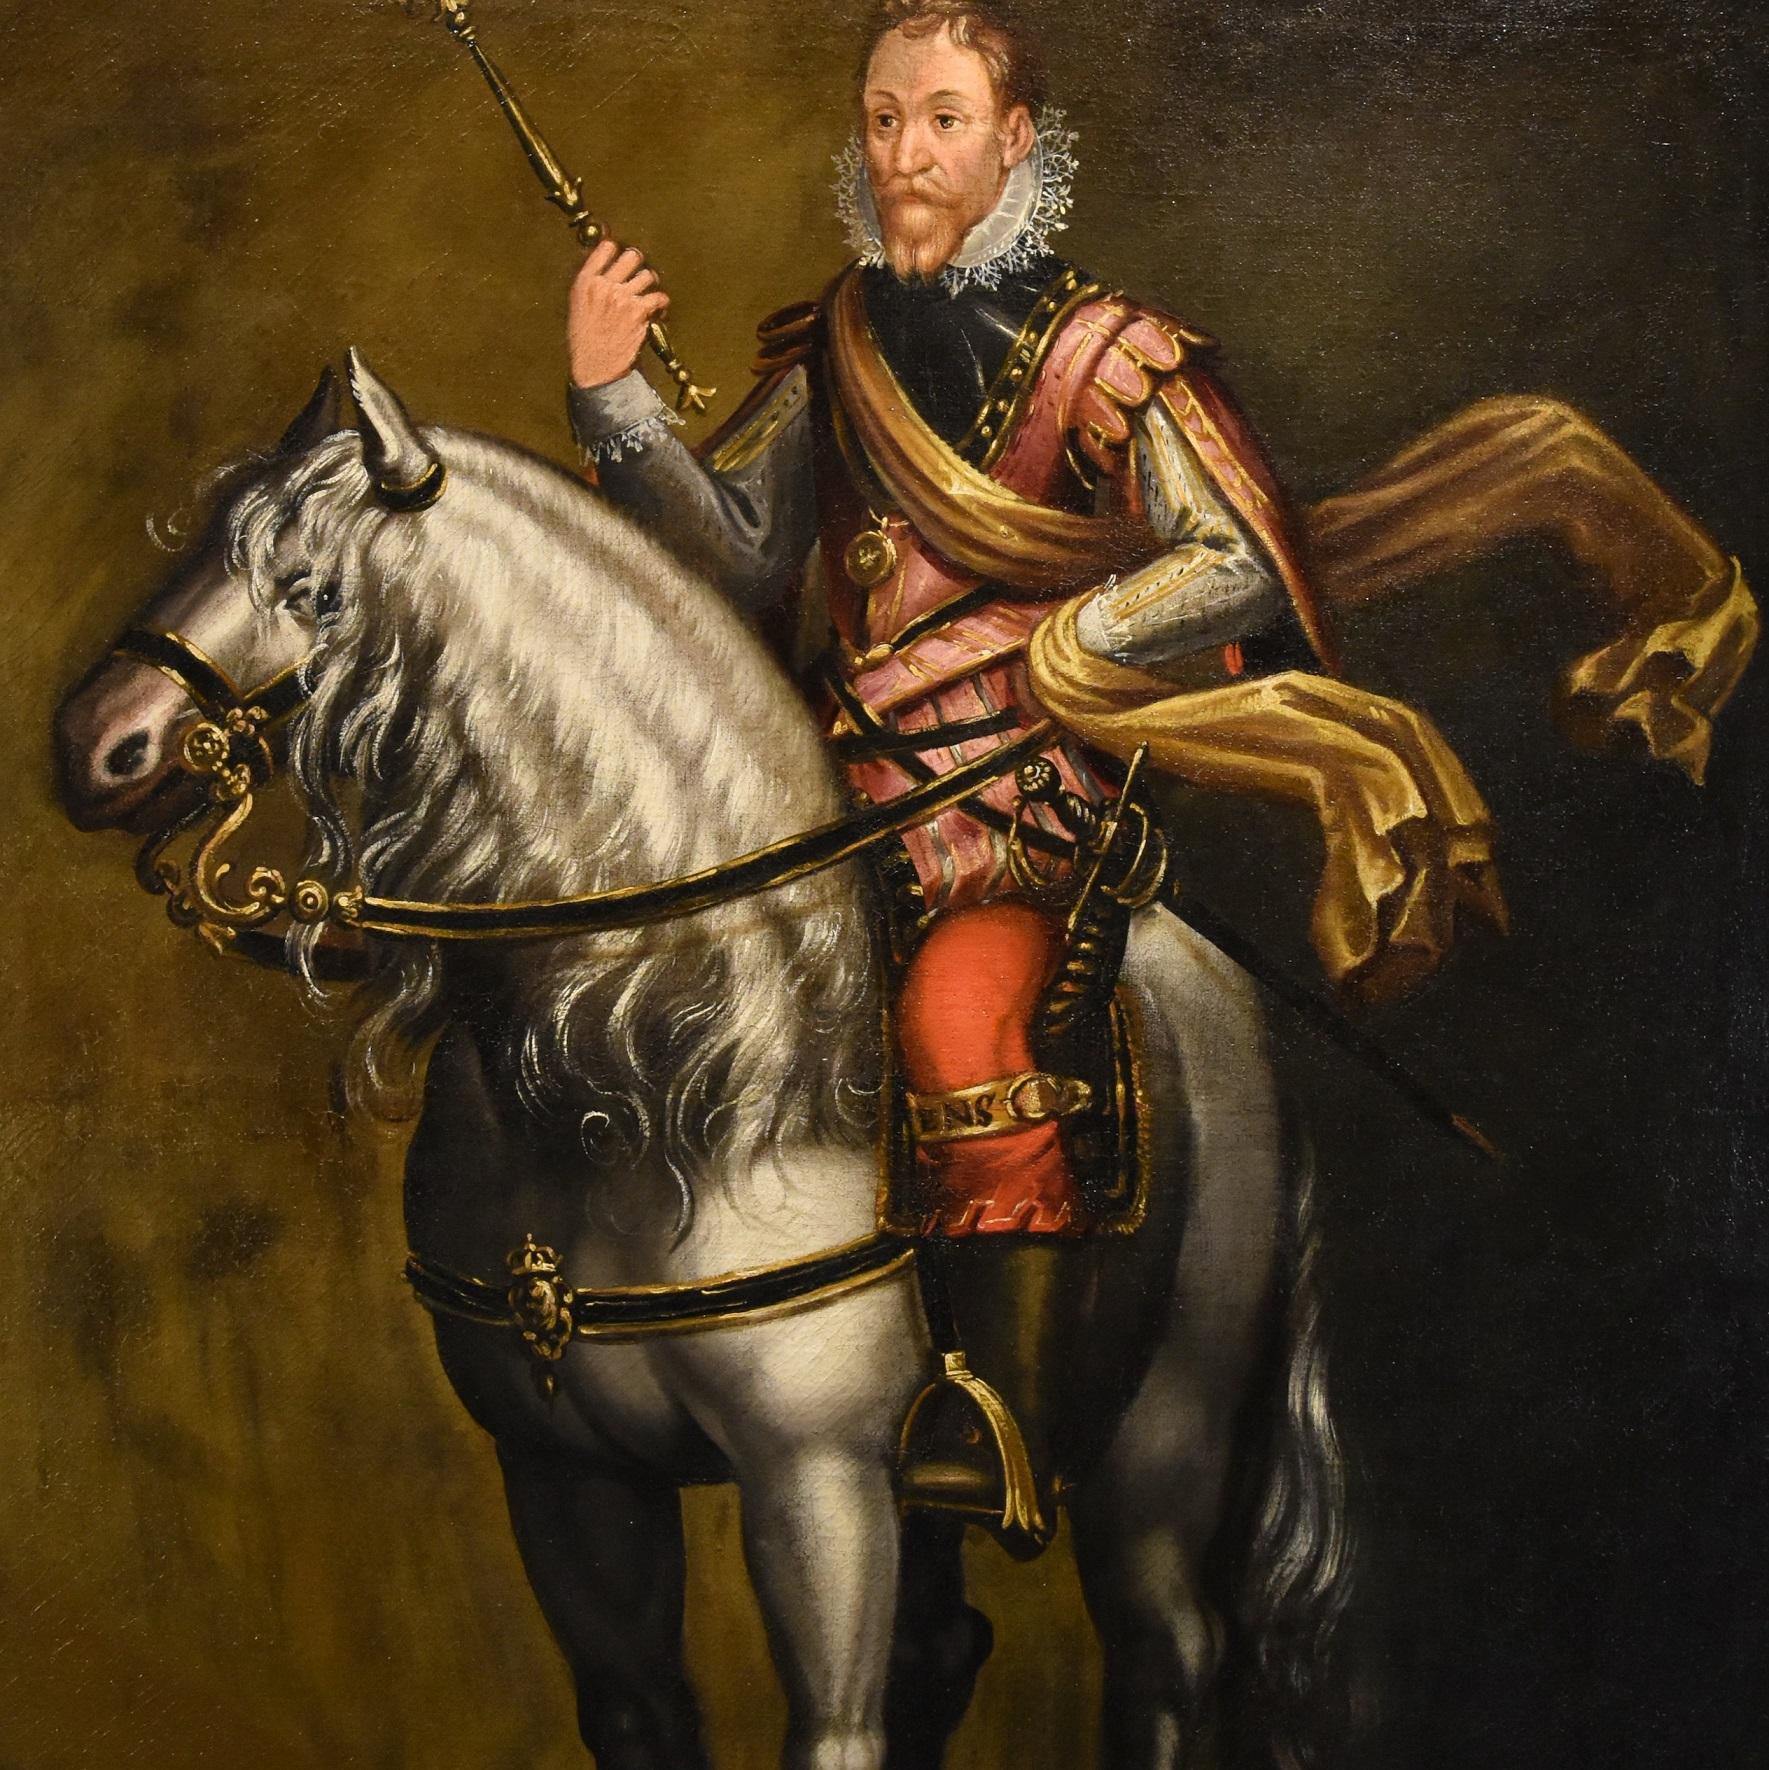 Equestrian Portrait Kraeck Paint Oil on canvas Old master 16/17th Century Italy - Old Masters Painting by Jan Kraeck, in Italy Giovanni Caracca (Haarlem c. 1540 - Turin 1607) 